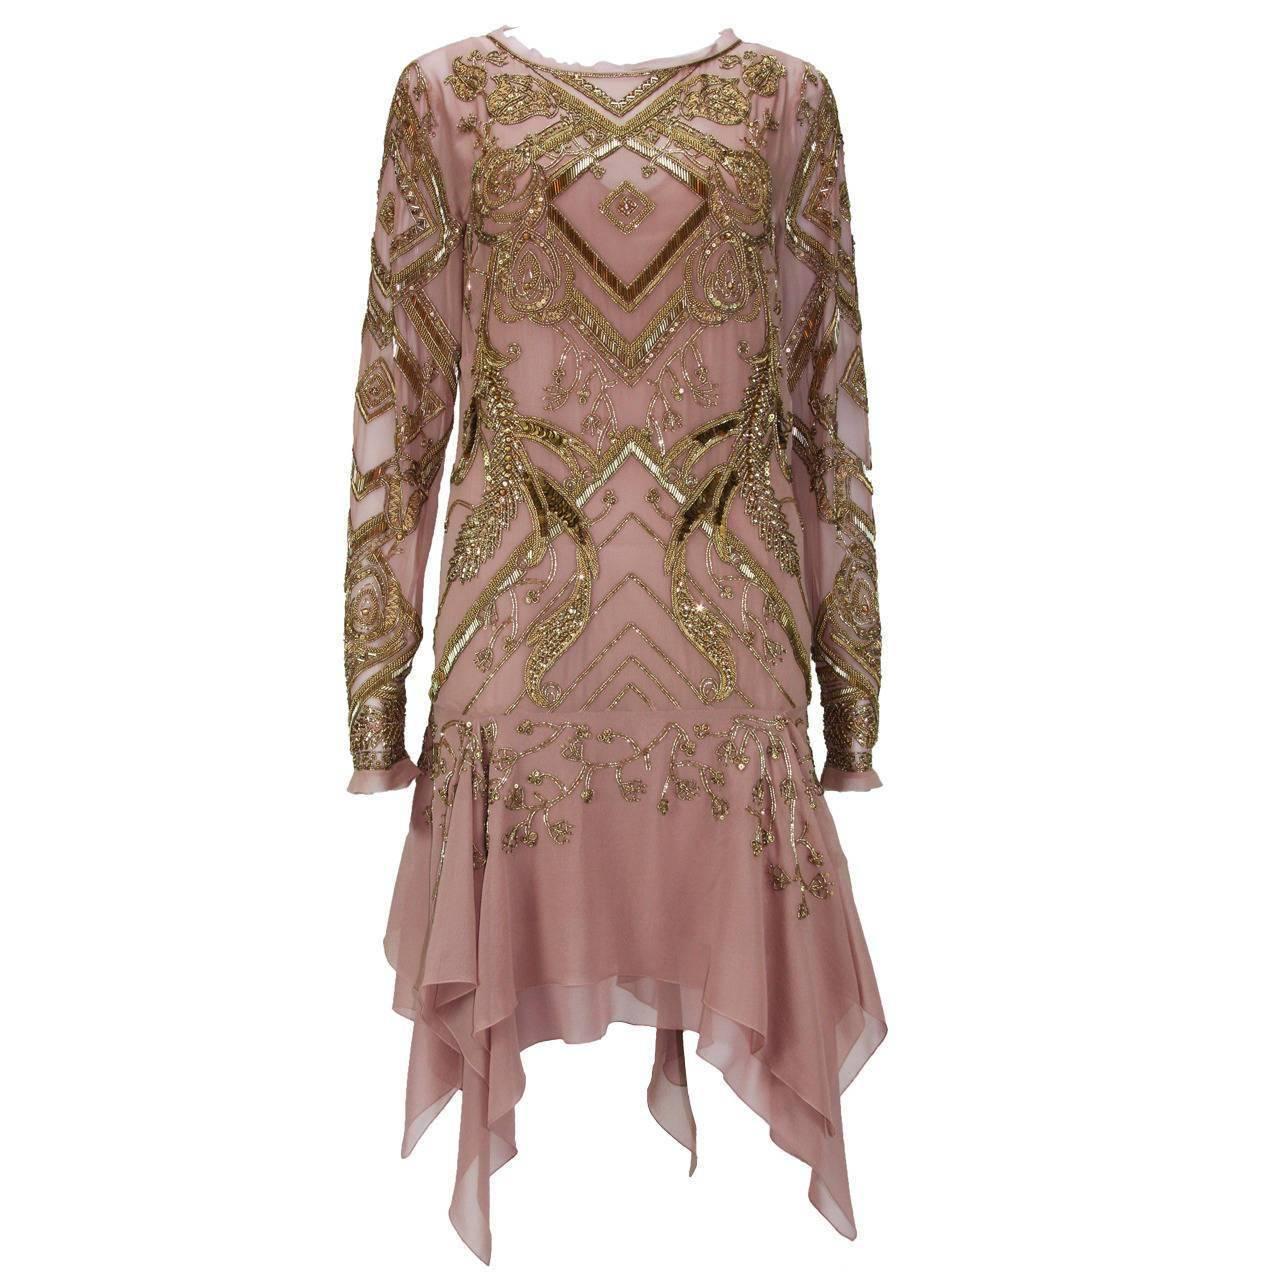 New EMILIO PUCCI 7K Fully Beaded Silk Cocktail Dress It.42 - US 6 For Sale